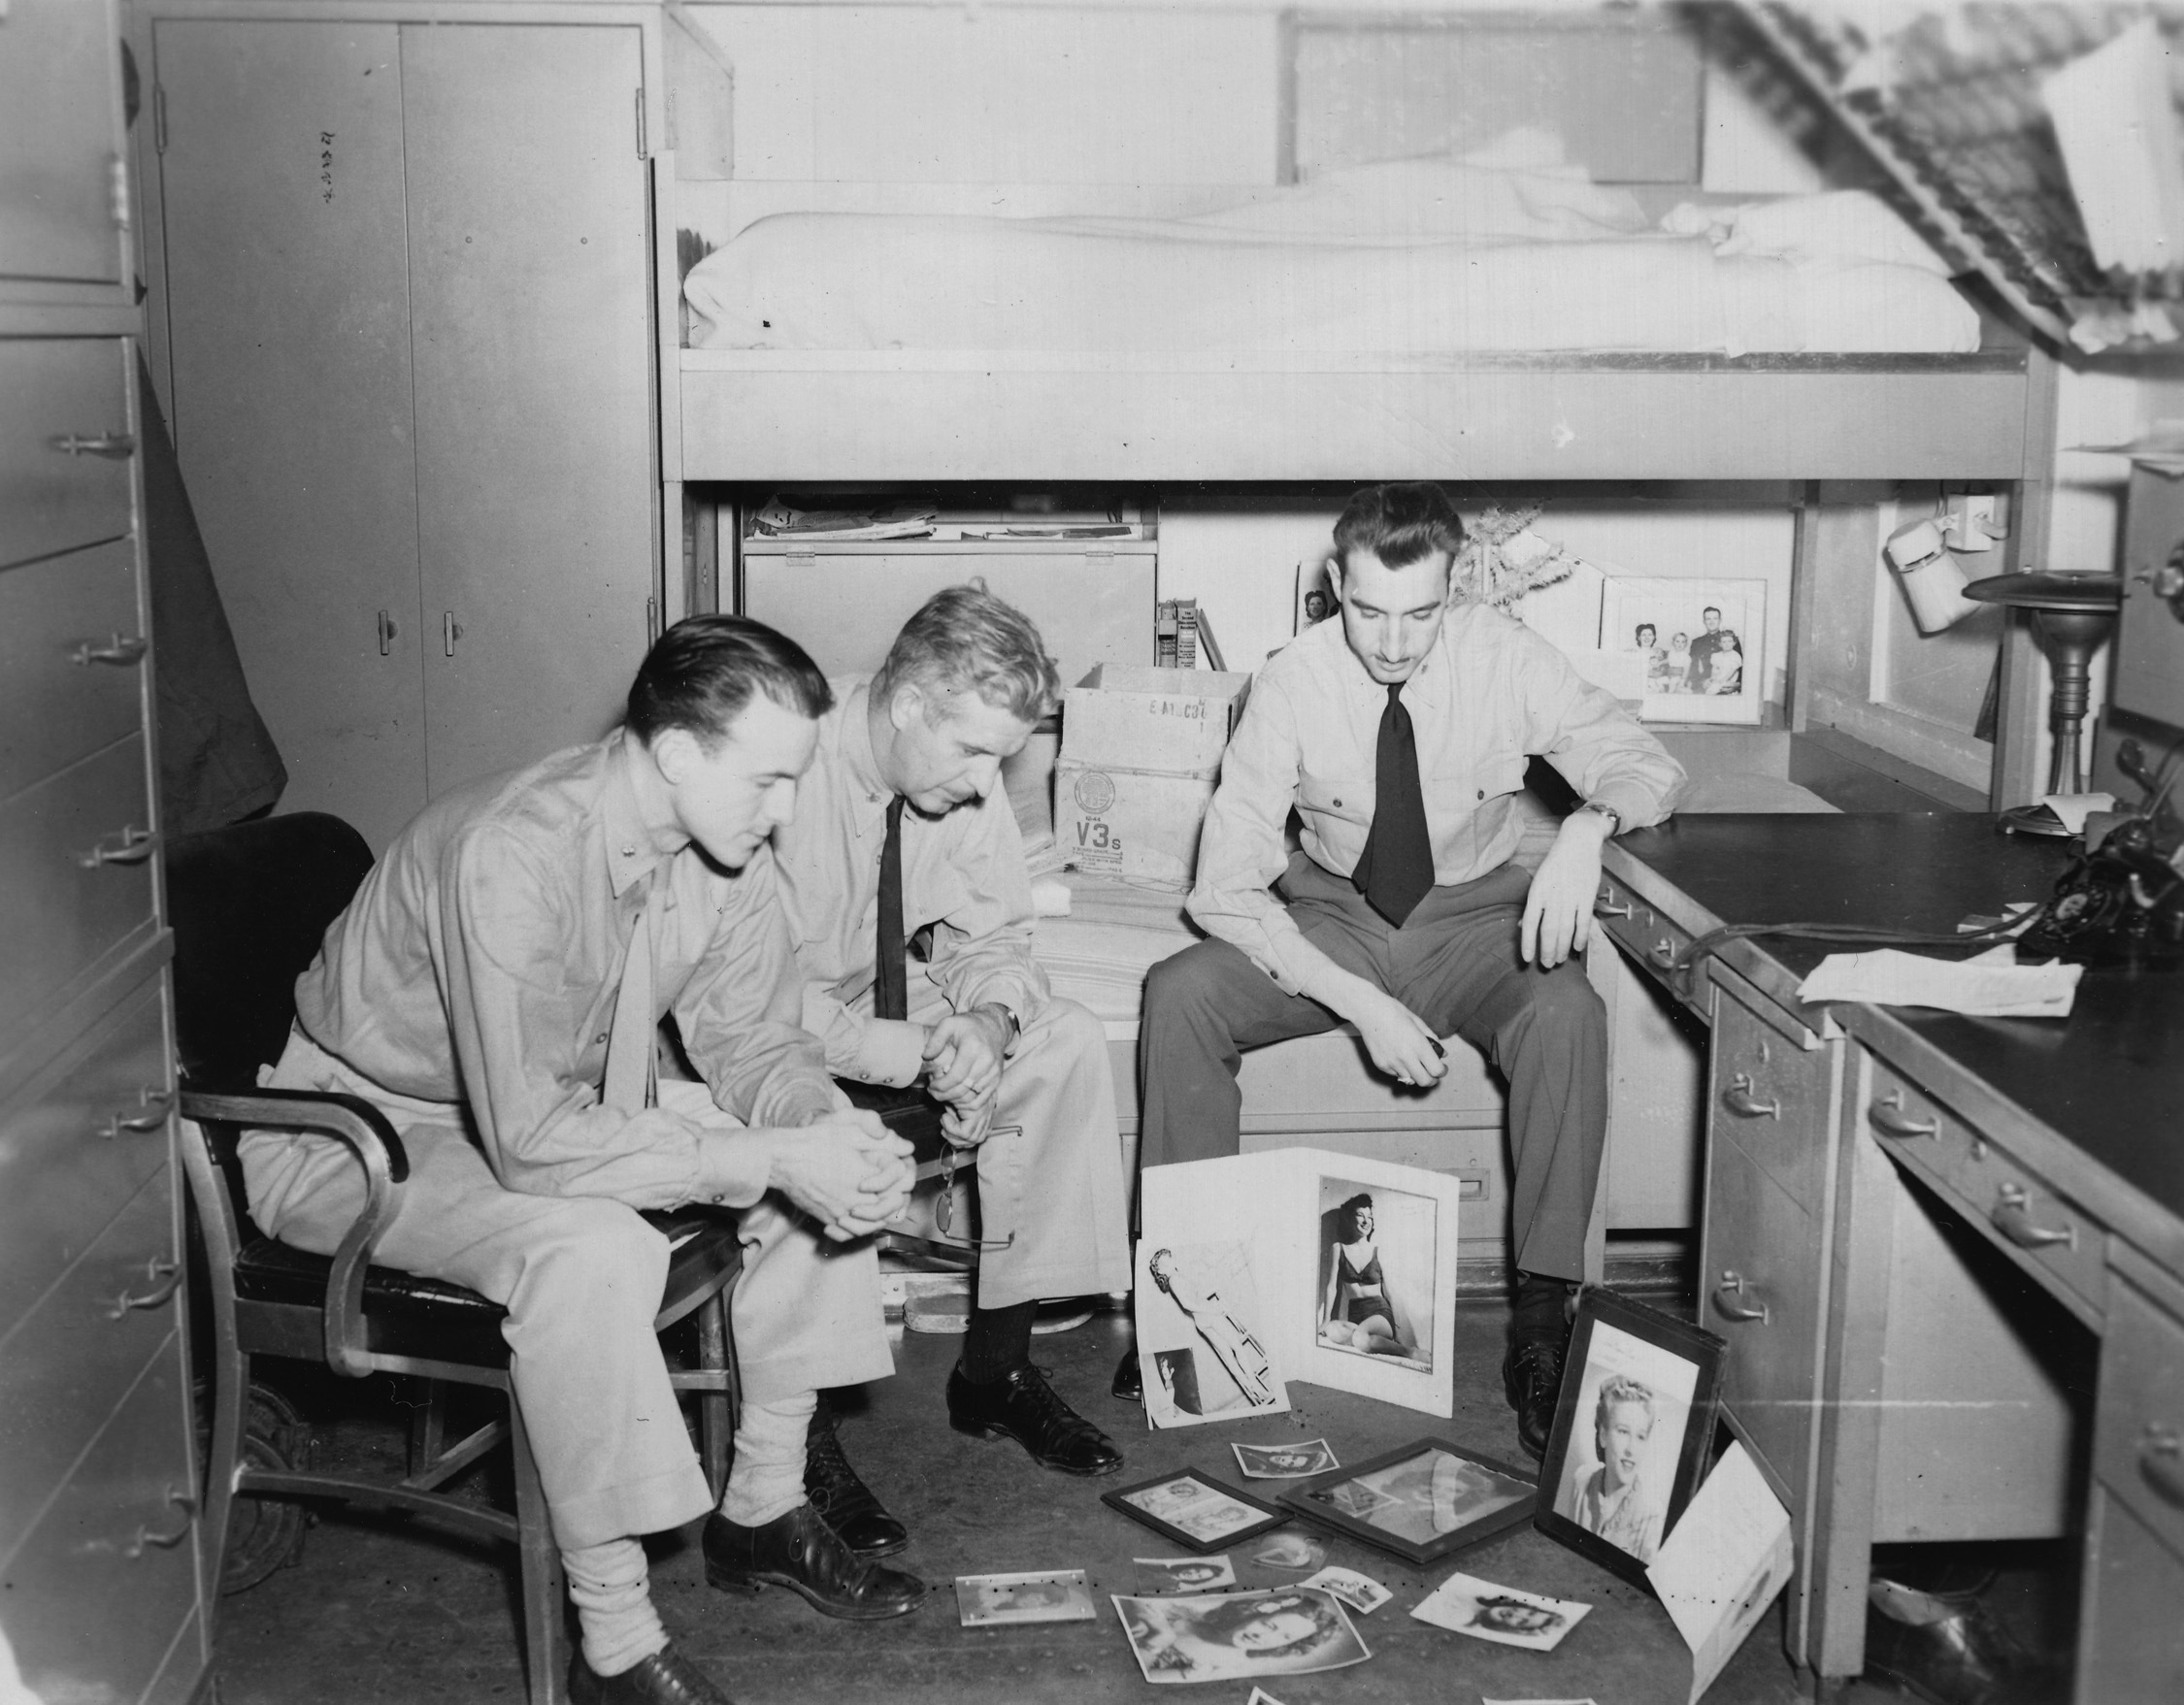 Norm Bayley, (l) in his cabin on the Boston, judging "prettiest girlfriend" contest, in Japanese Waters, Christmas 1945 